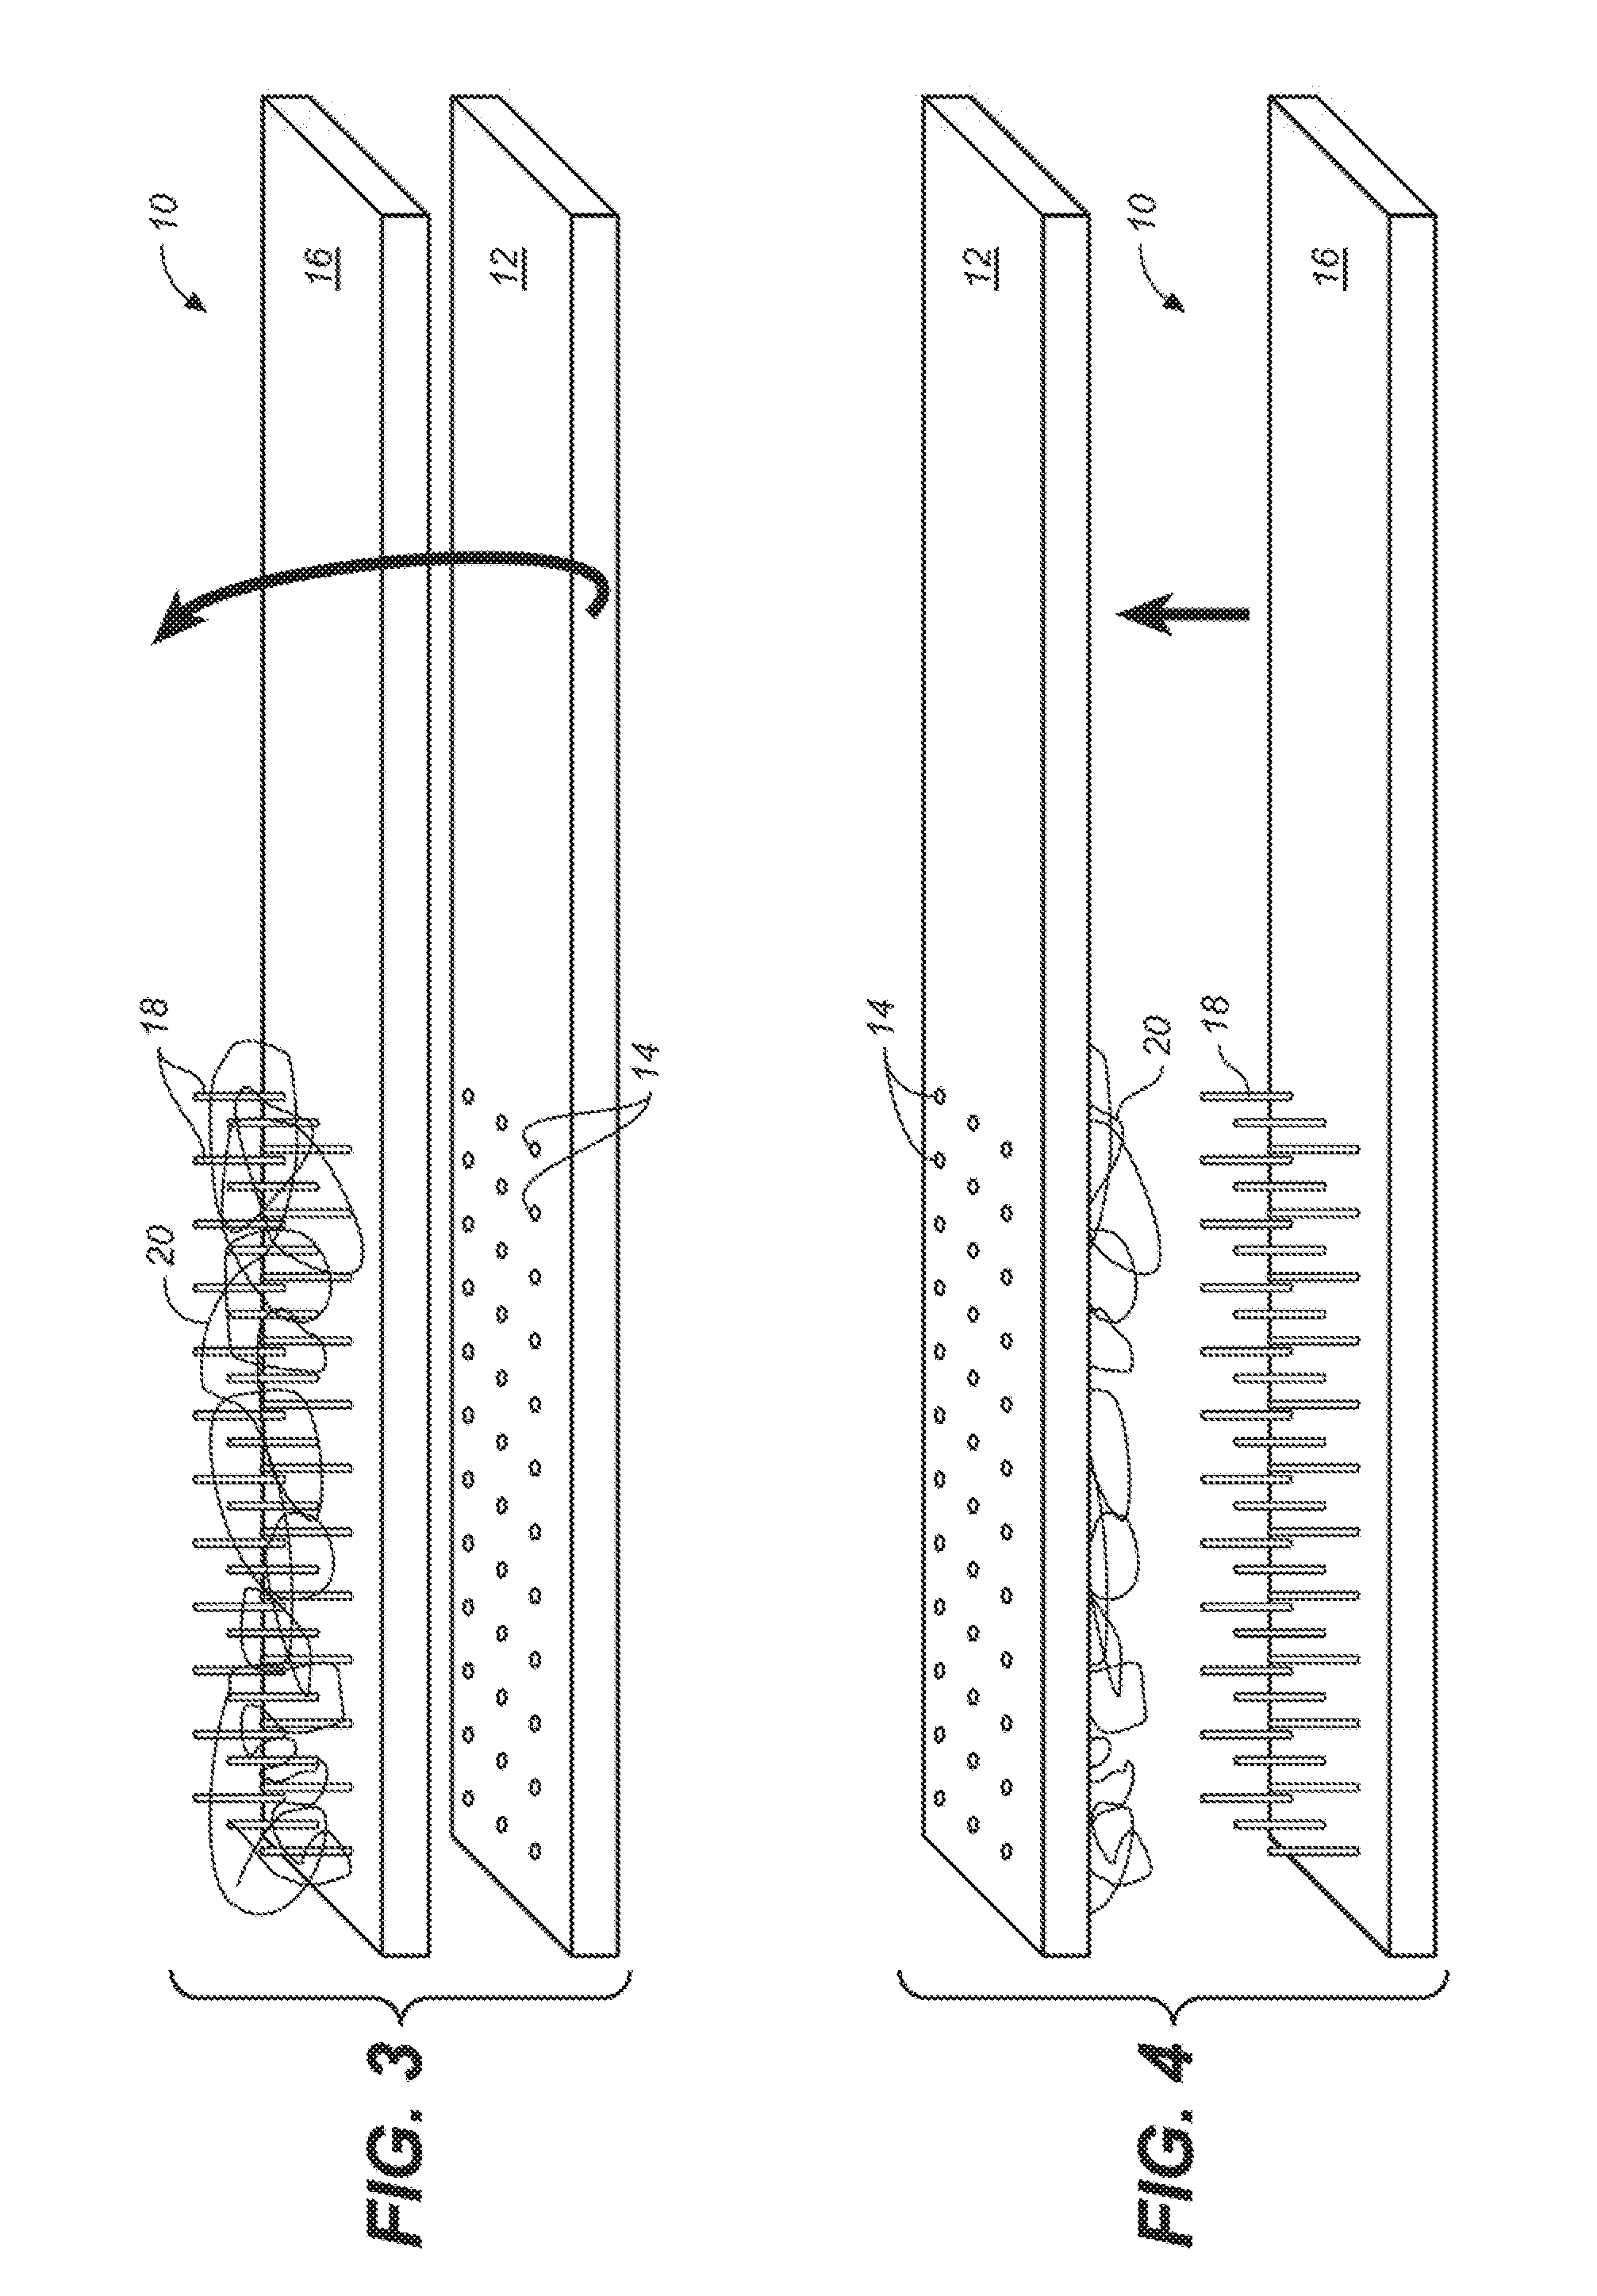 Magnetically induced hair brush cleaner system and method of using same